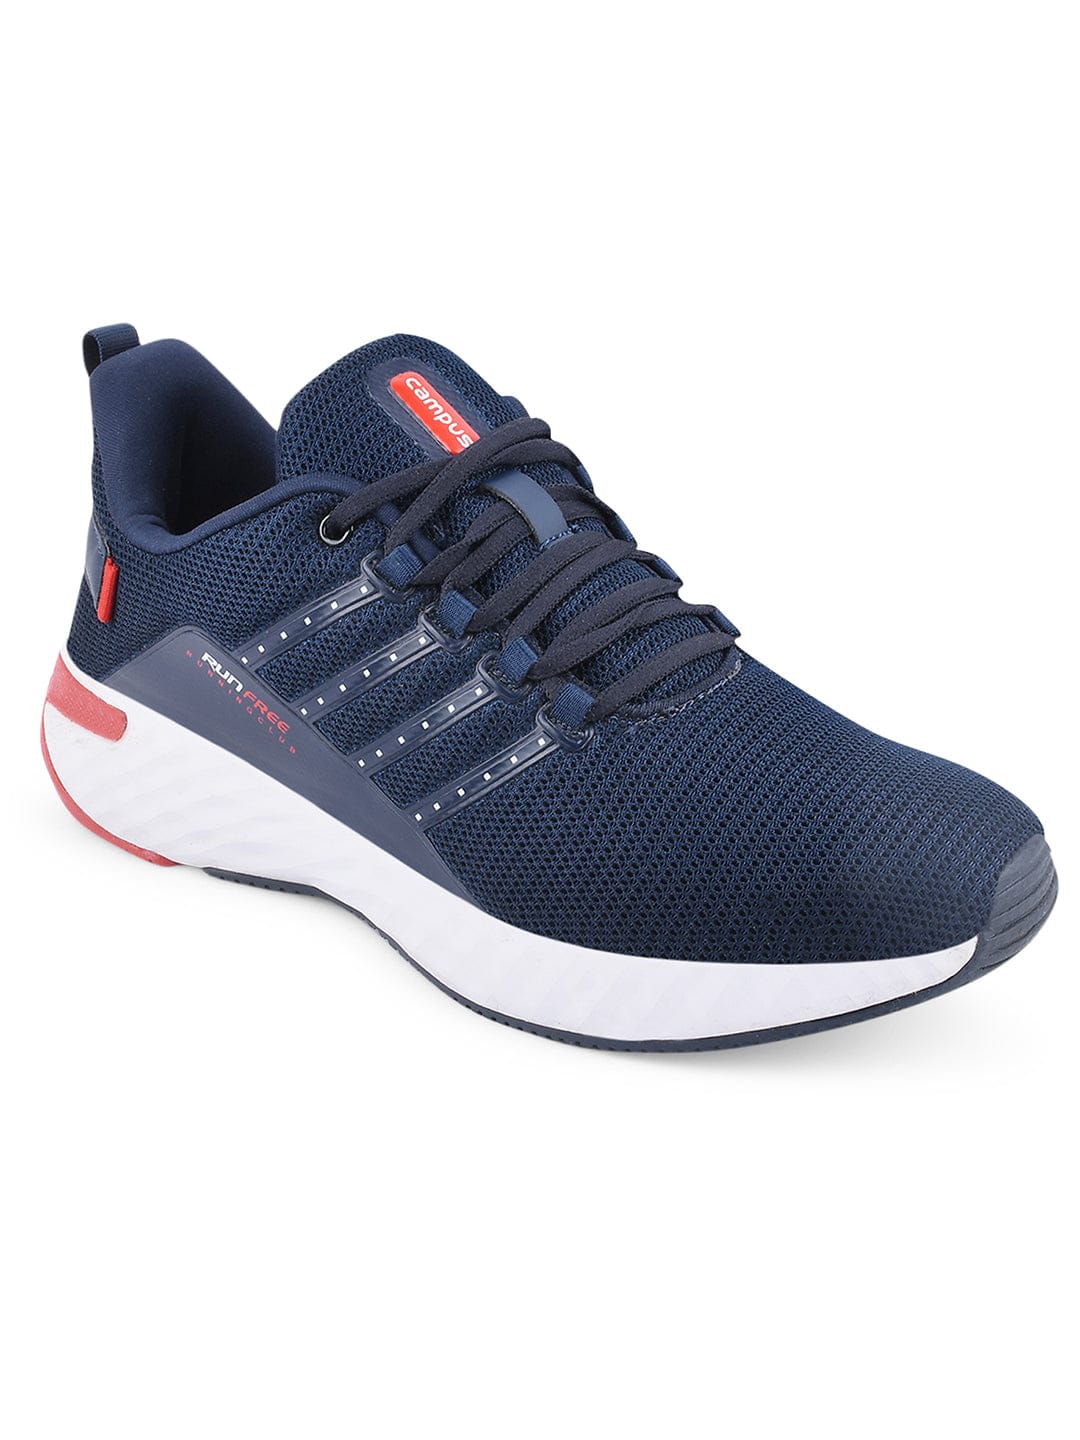 Buy Running Shoes For Men: Oslo-Pro-Navy-Red | Campus Shoes